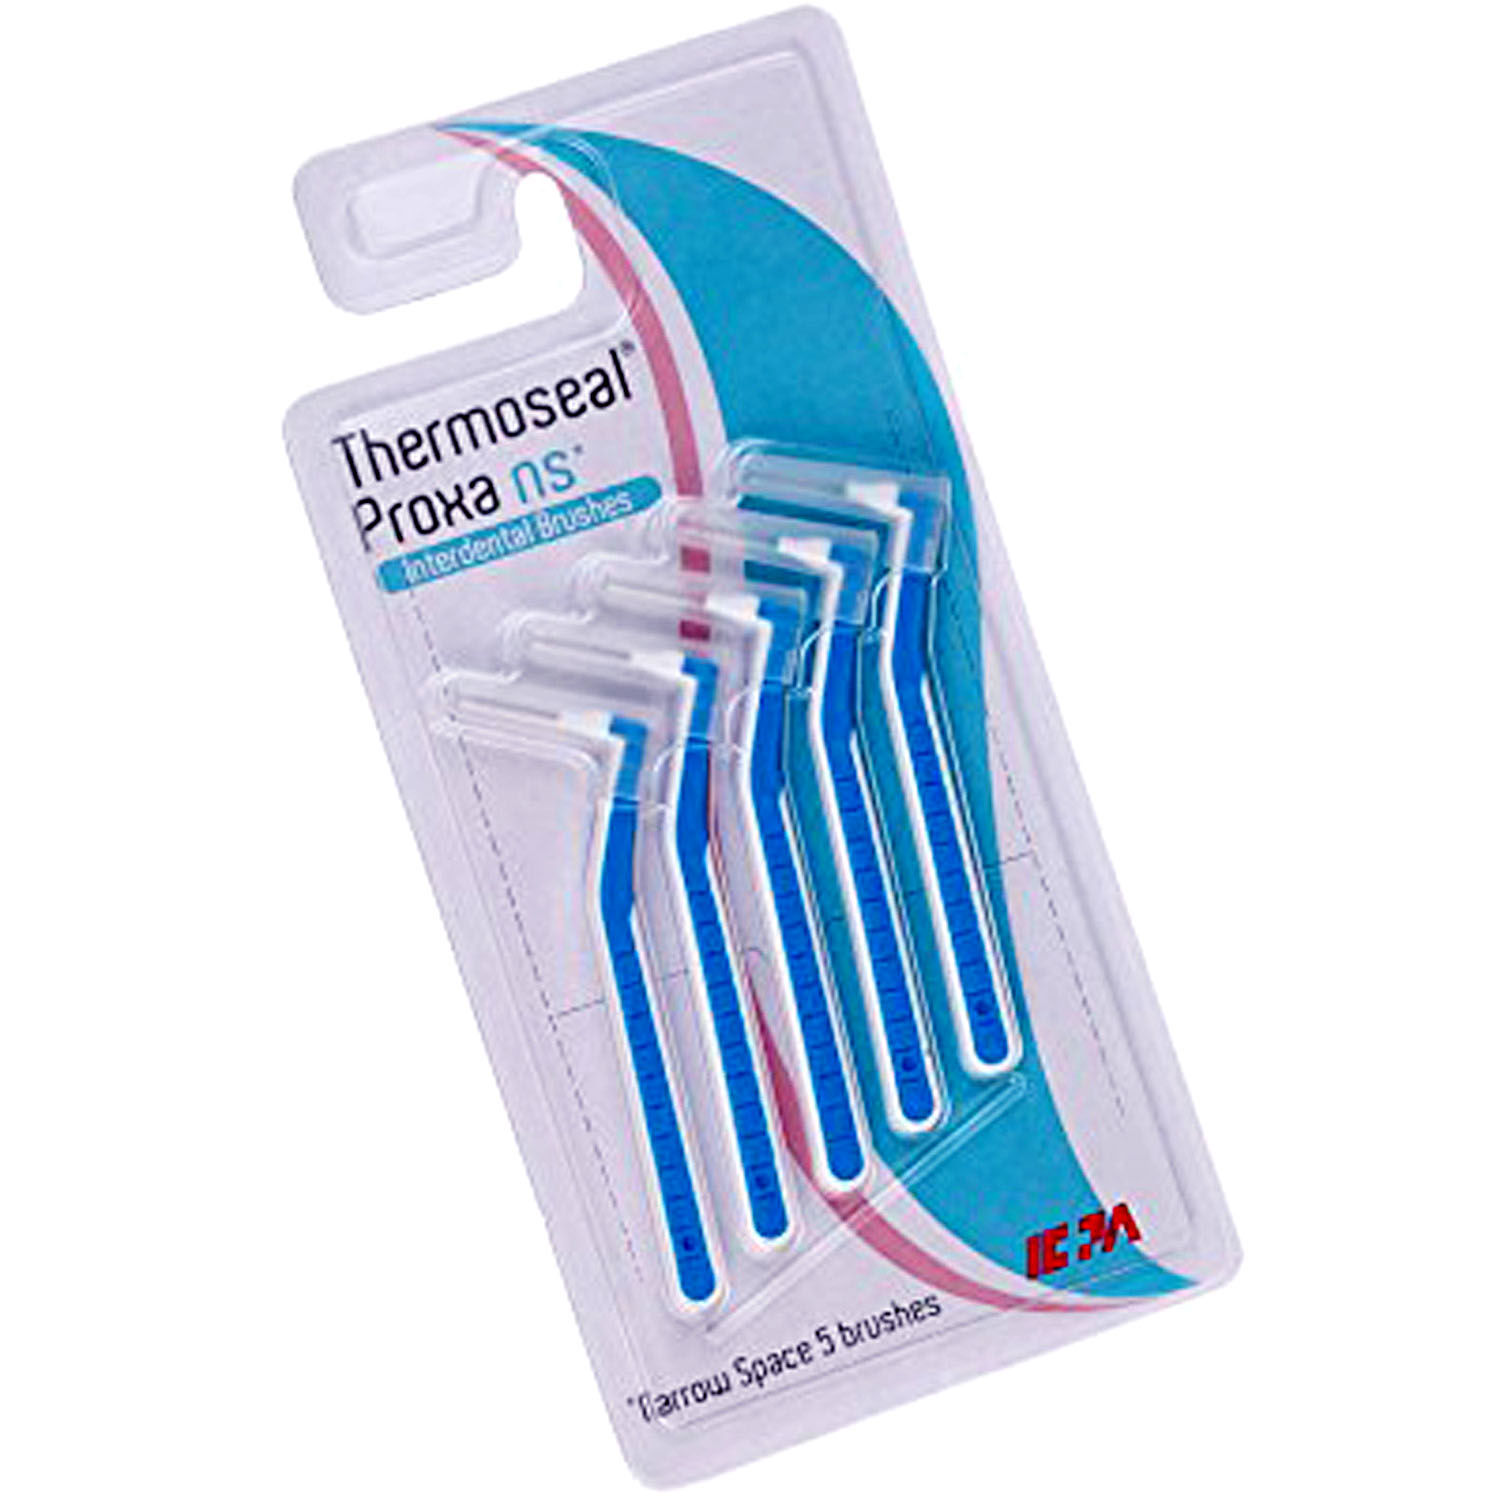 Buy Thermoseal Proxa Narrow Space Interdental Brushes, 5 Count Online